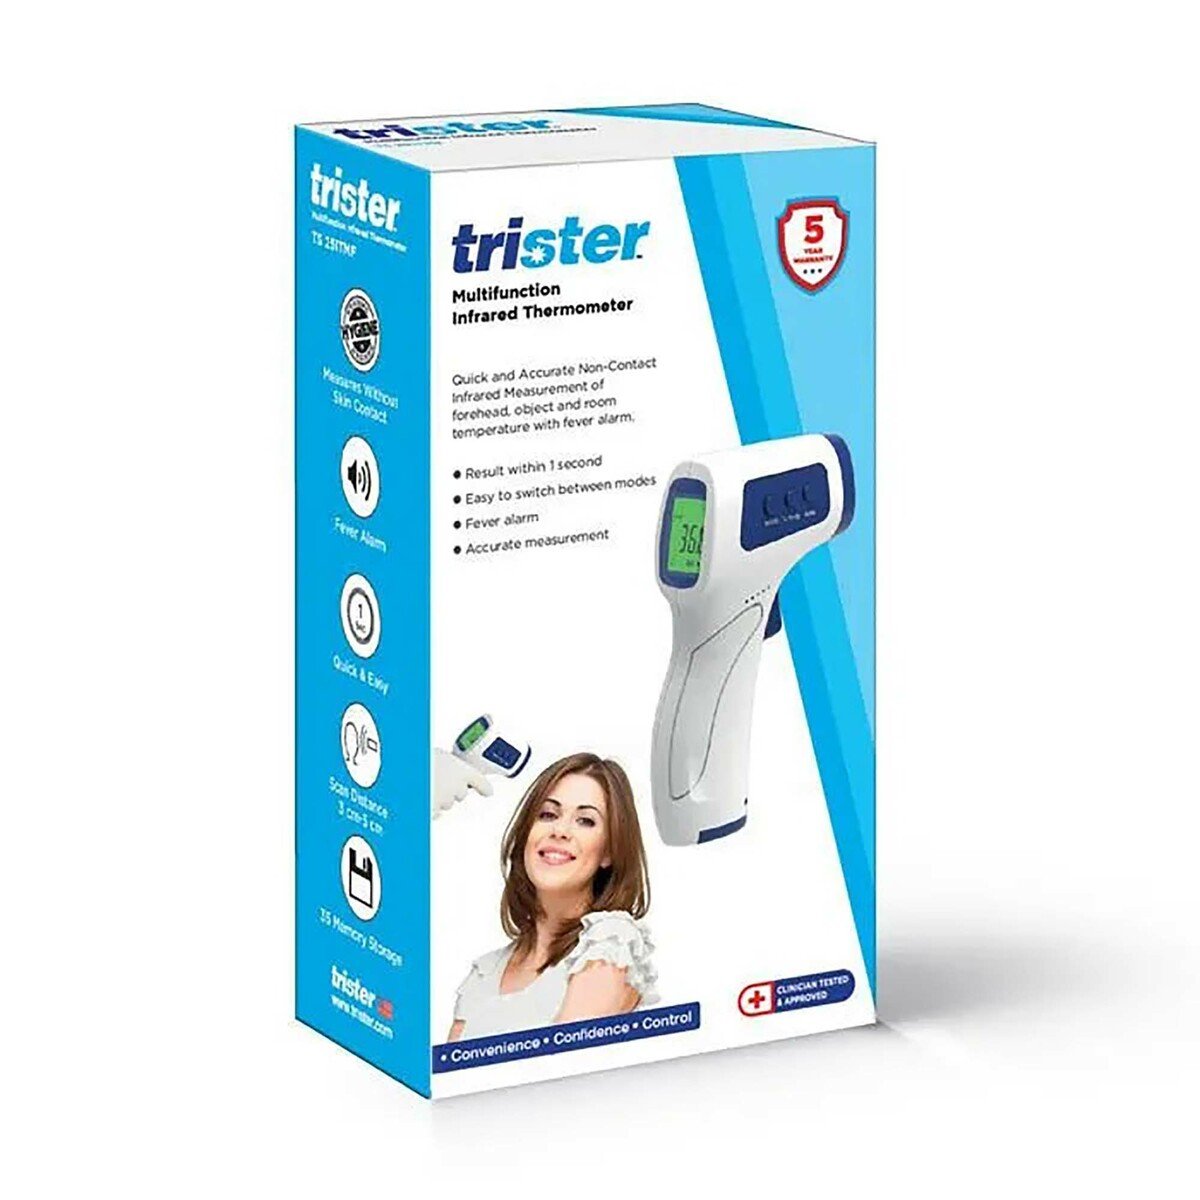 Trister Multifunction Infrared Thermometer TS-251TFM